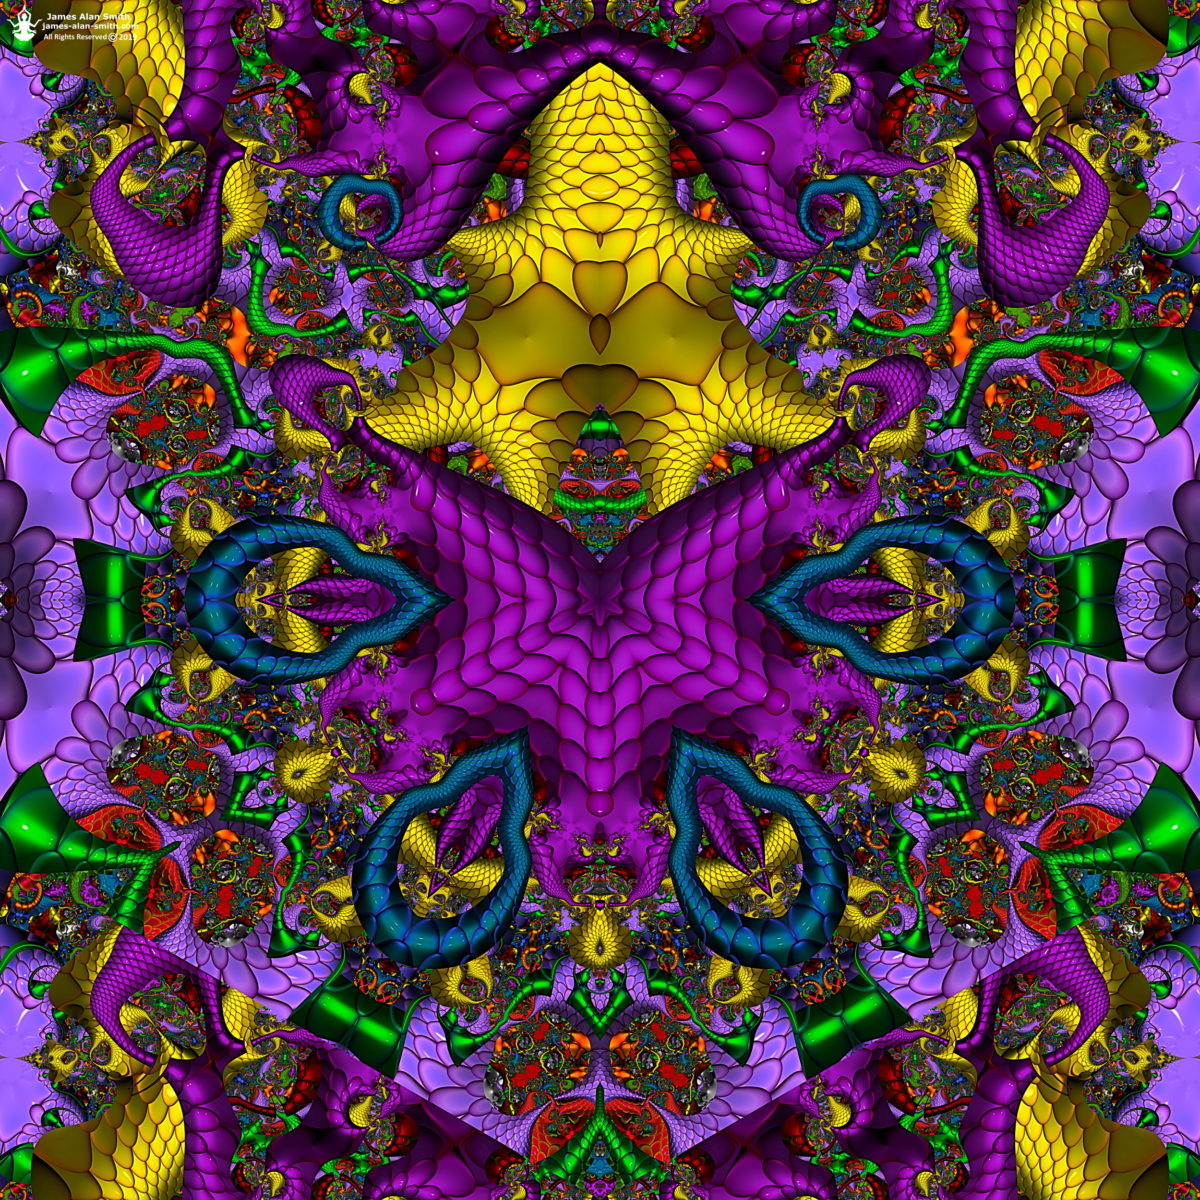 Universal Iteration 7: Artwork by James Alan Smith